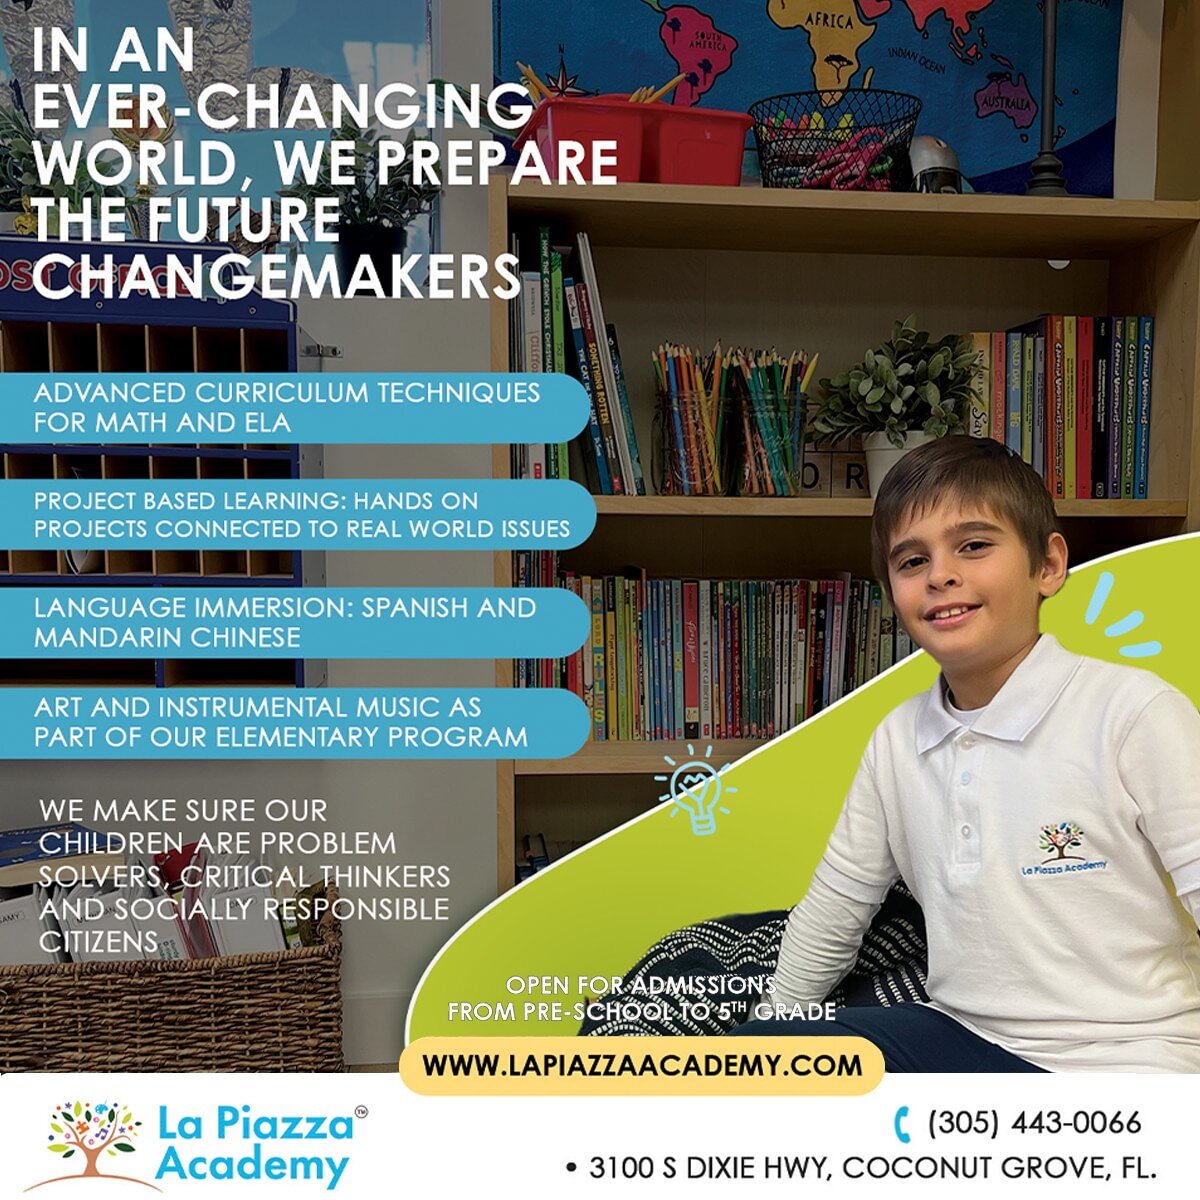 La Piazza Academy cultivates the ability to wonder, reflect critically, and to be compassionate global citizens through our progressive program from Preschool to 5th Grade.

Call 305-443-0066 today to learn more about admissions!

#lapiazzaacademy #p